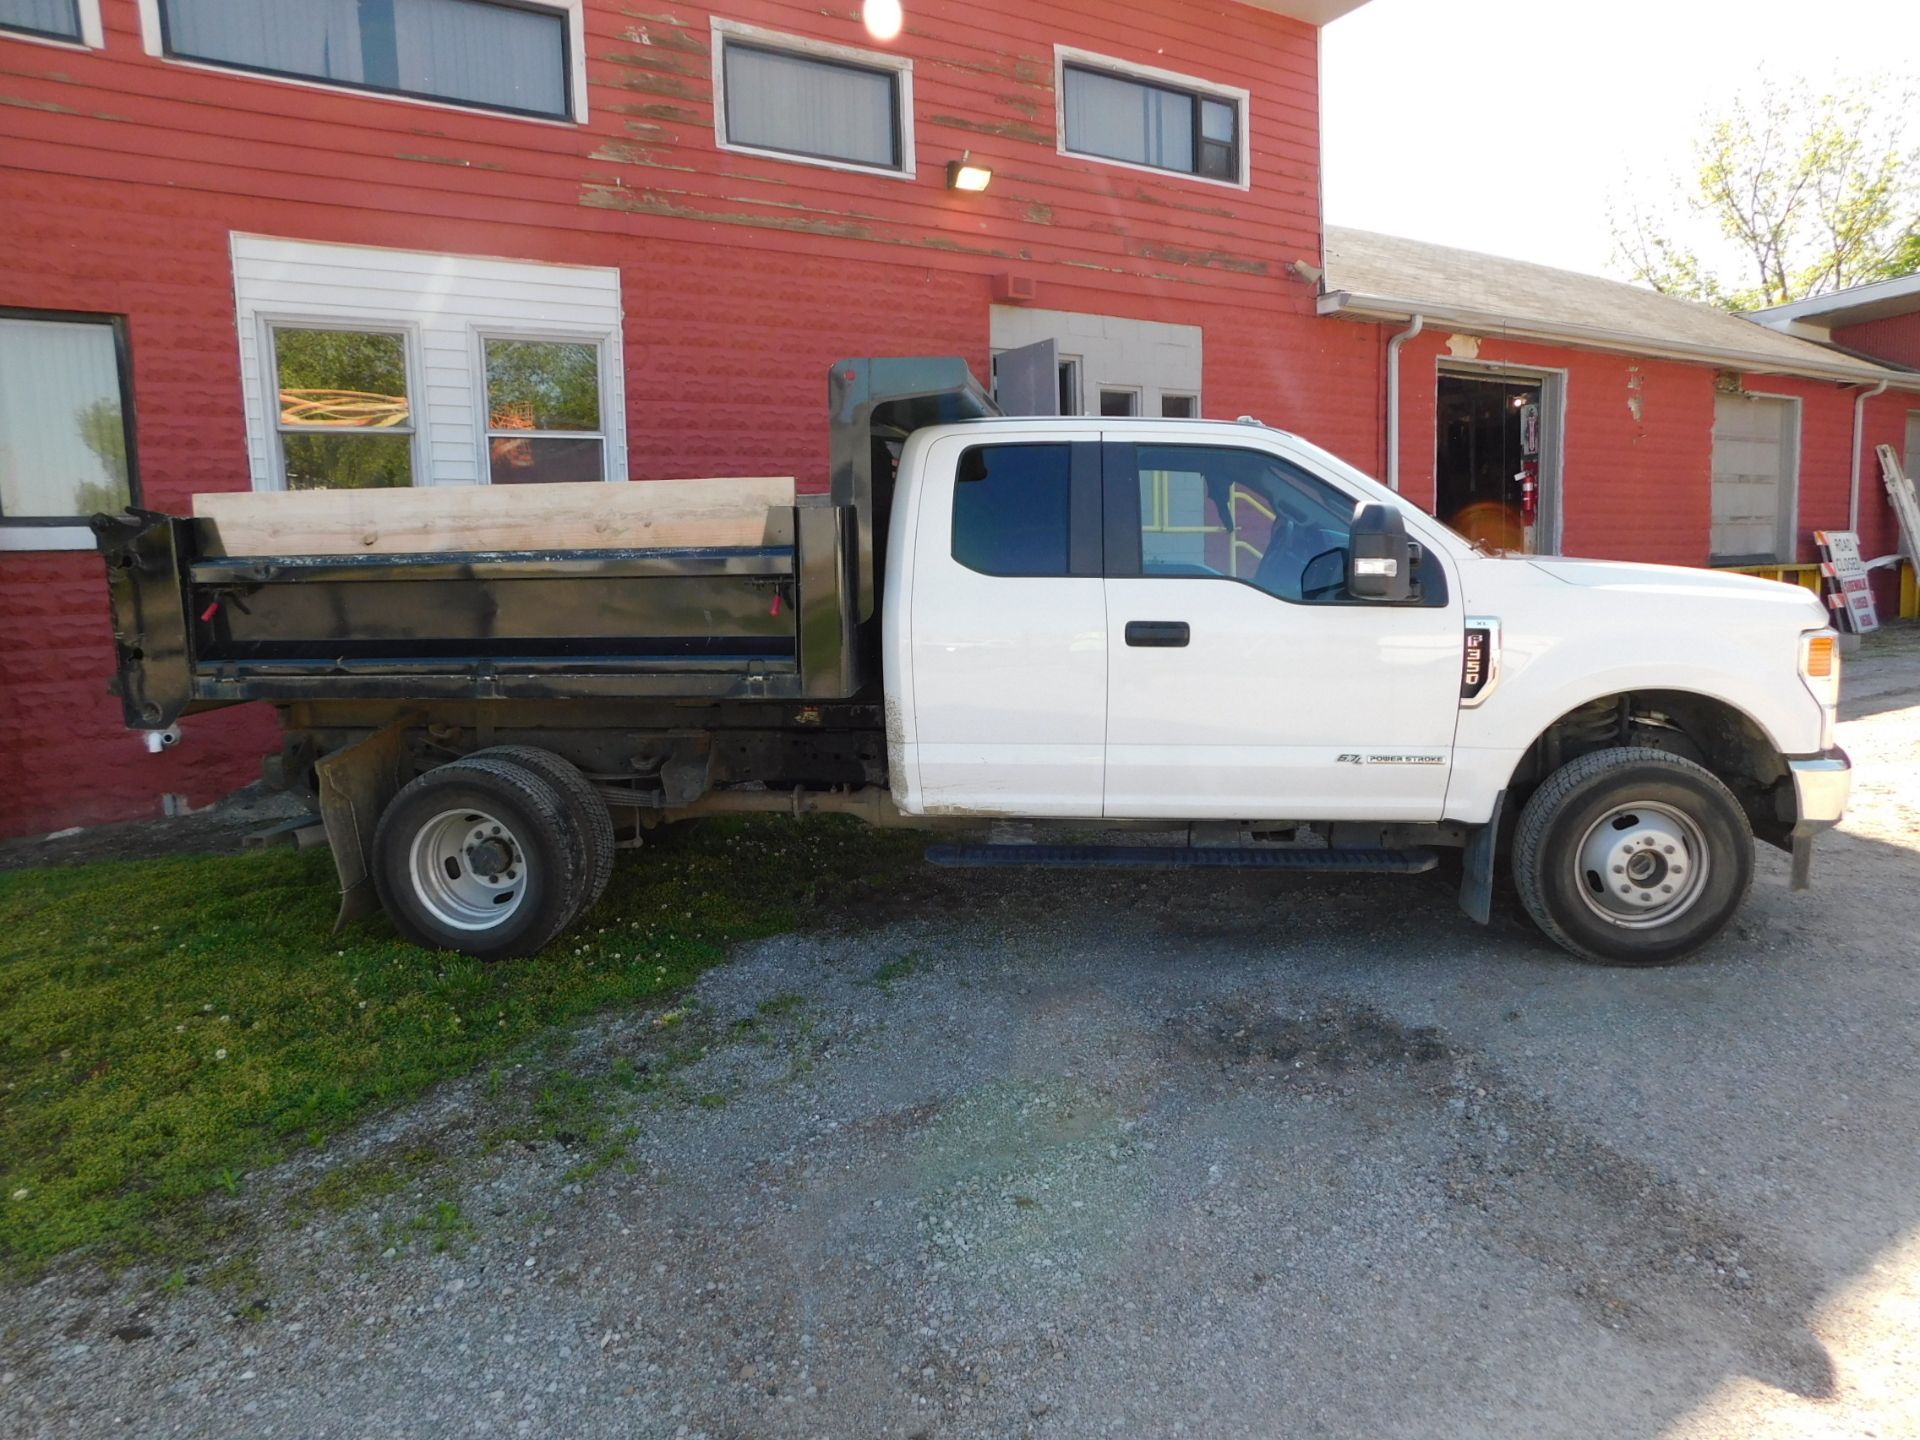 2020 Ford F-350XL Single Axle Dump Truck vin 1FD8X3HT6LEE89344, 6.7 Diesel Engine, Automatic - Image 4 of 56